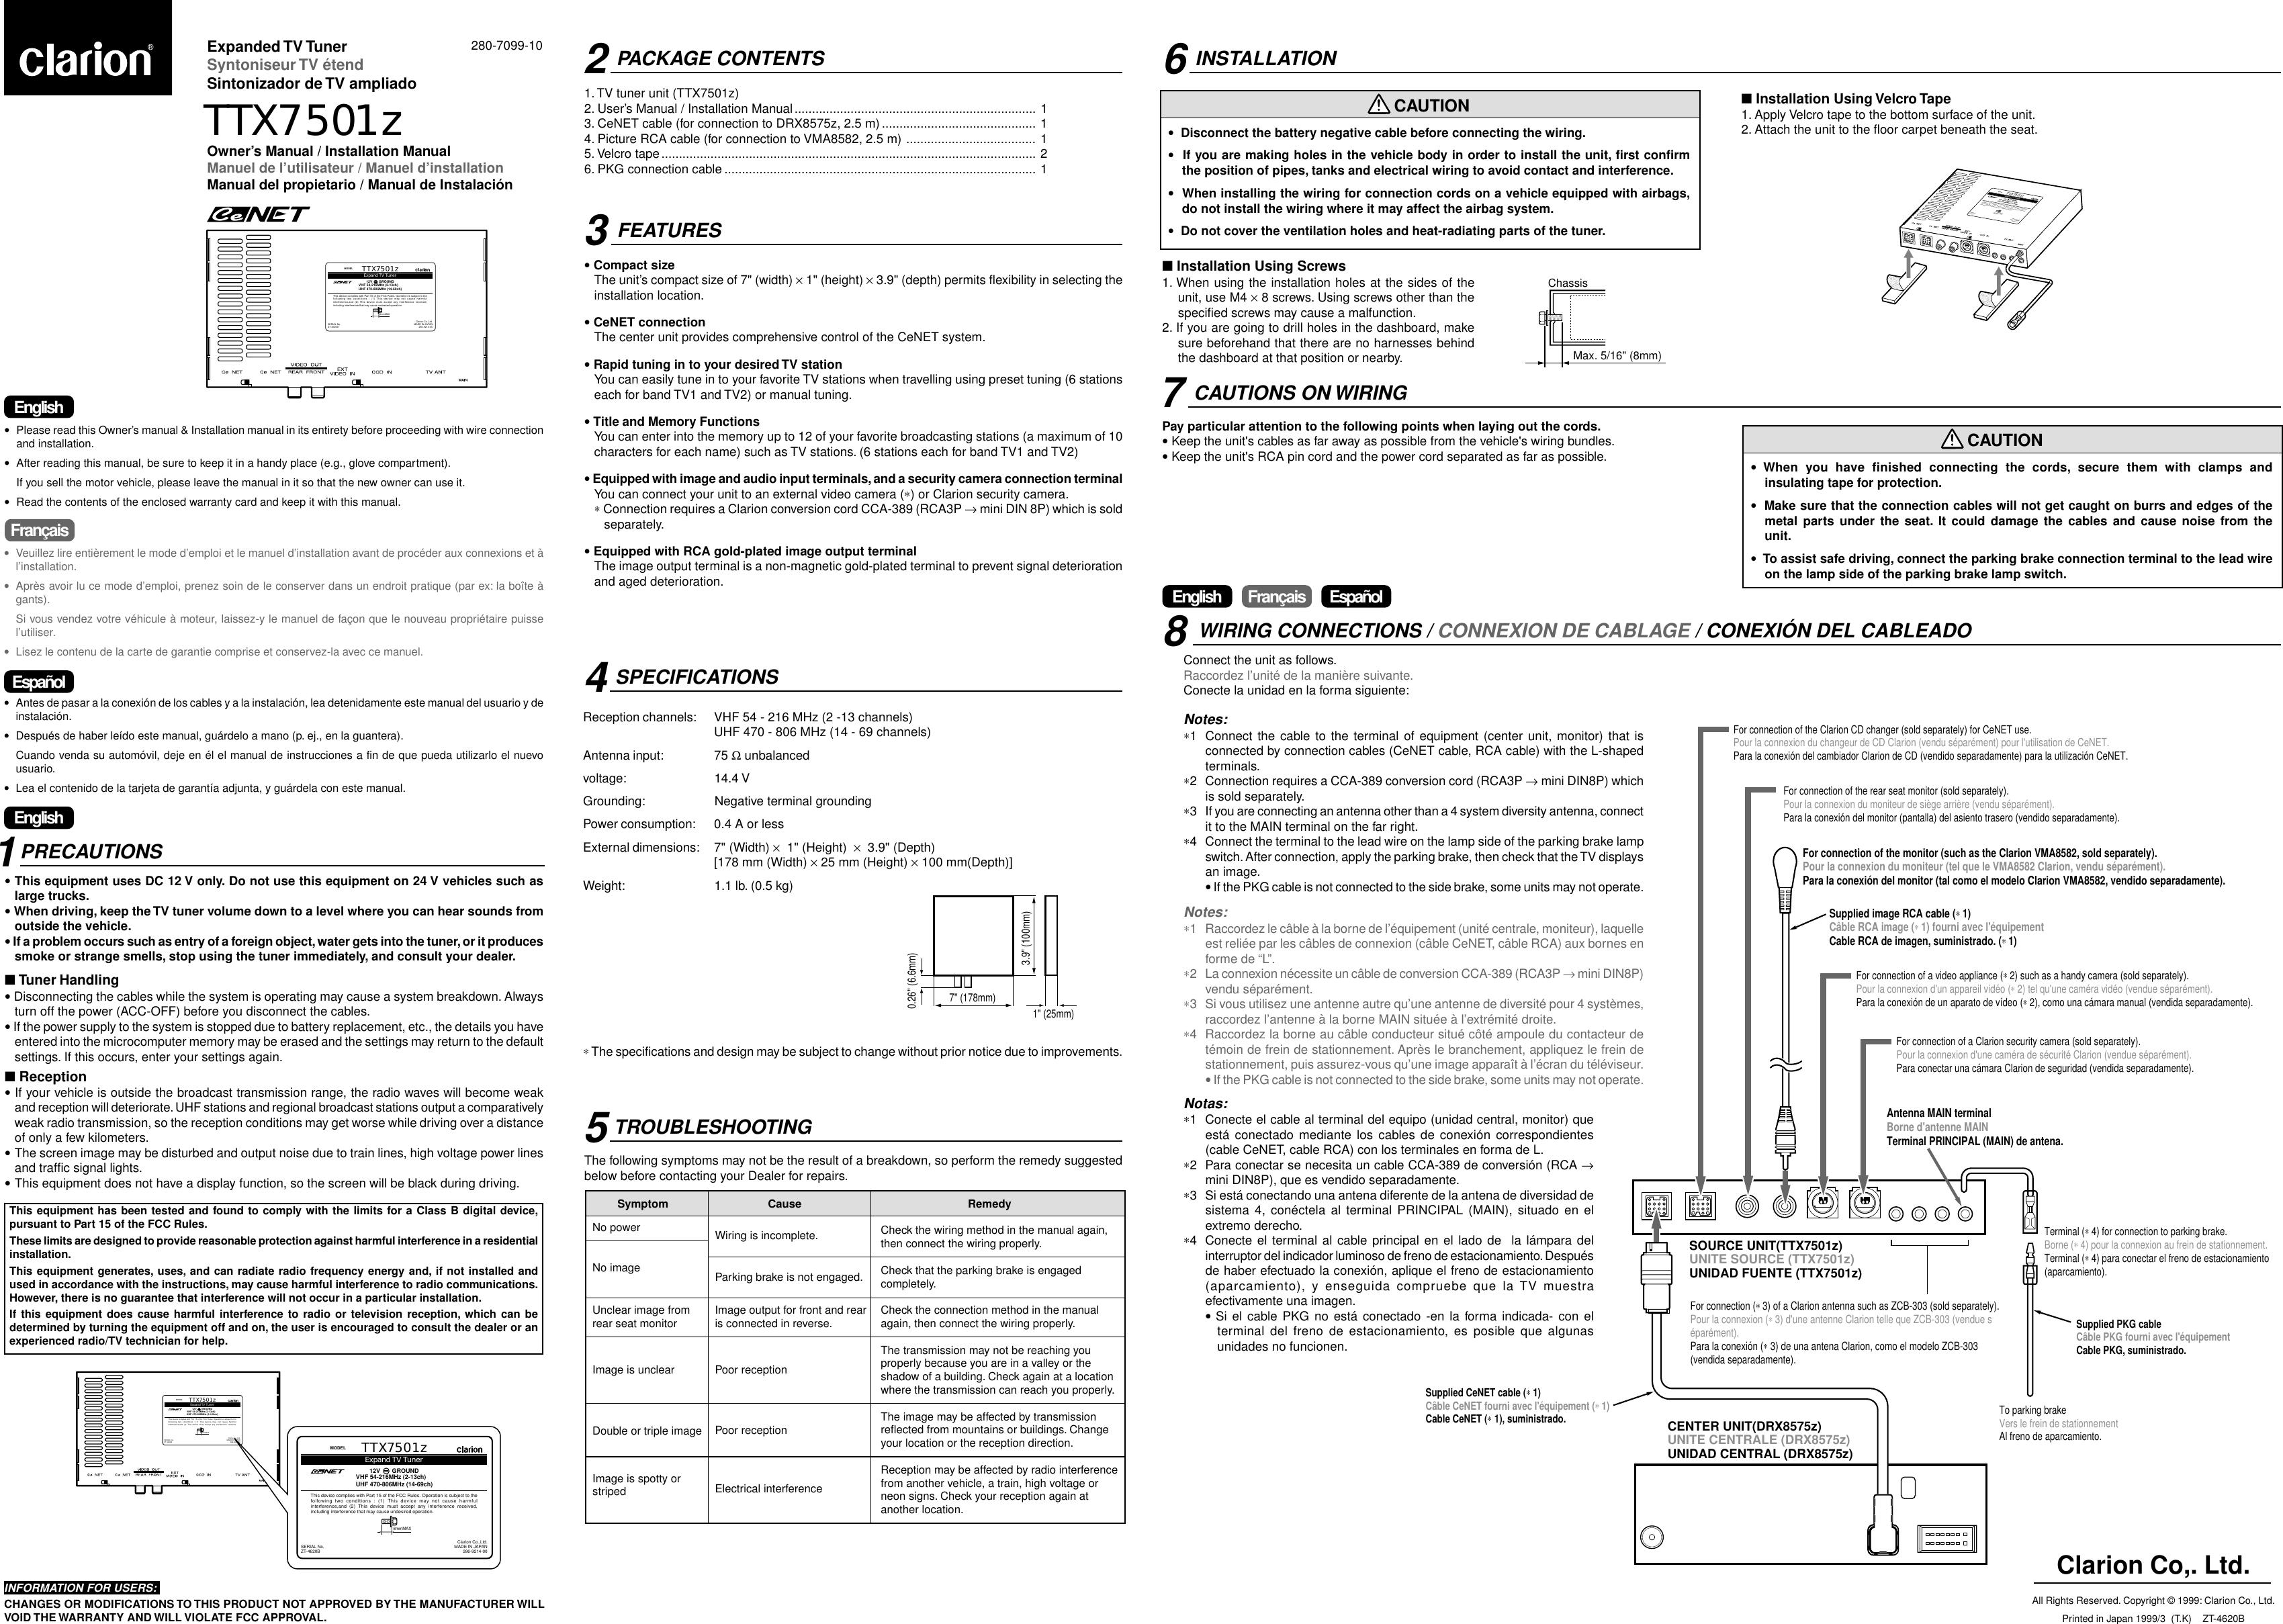 Page 1 of 1 - Clarion Clarion-Cenet-Ttx7501Z-Users-Manual- TTX7501z  Clarion-cenet-ttx7501z-users-manual